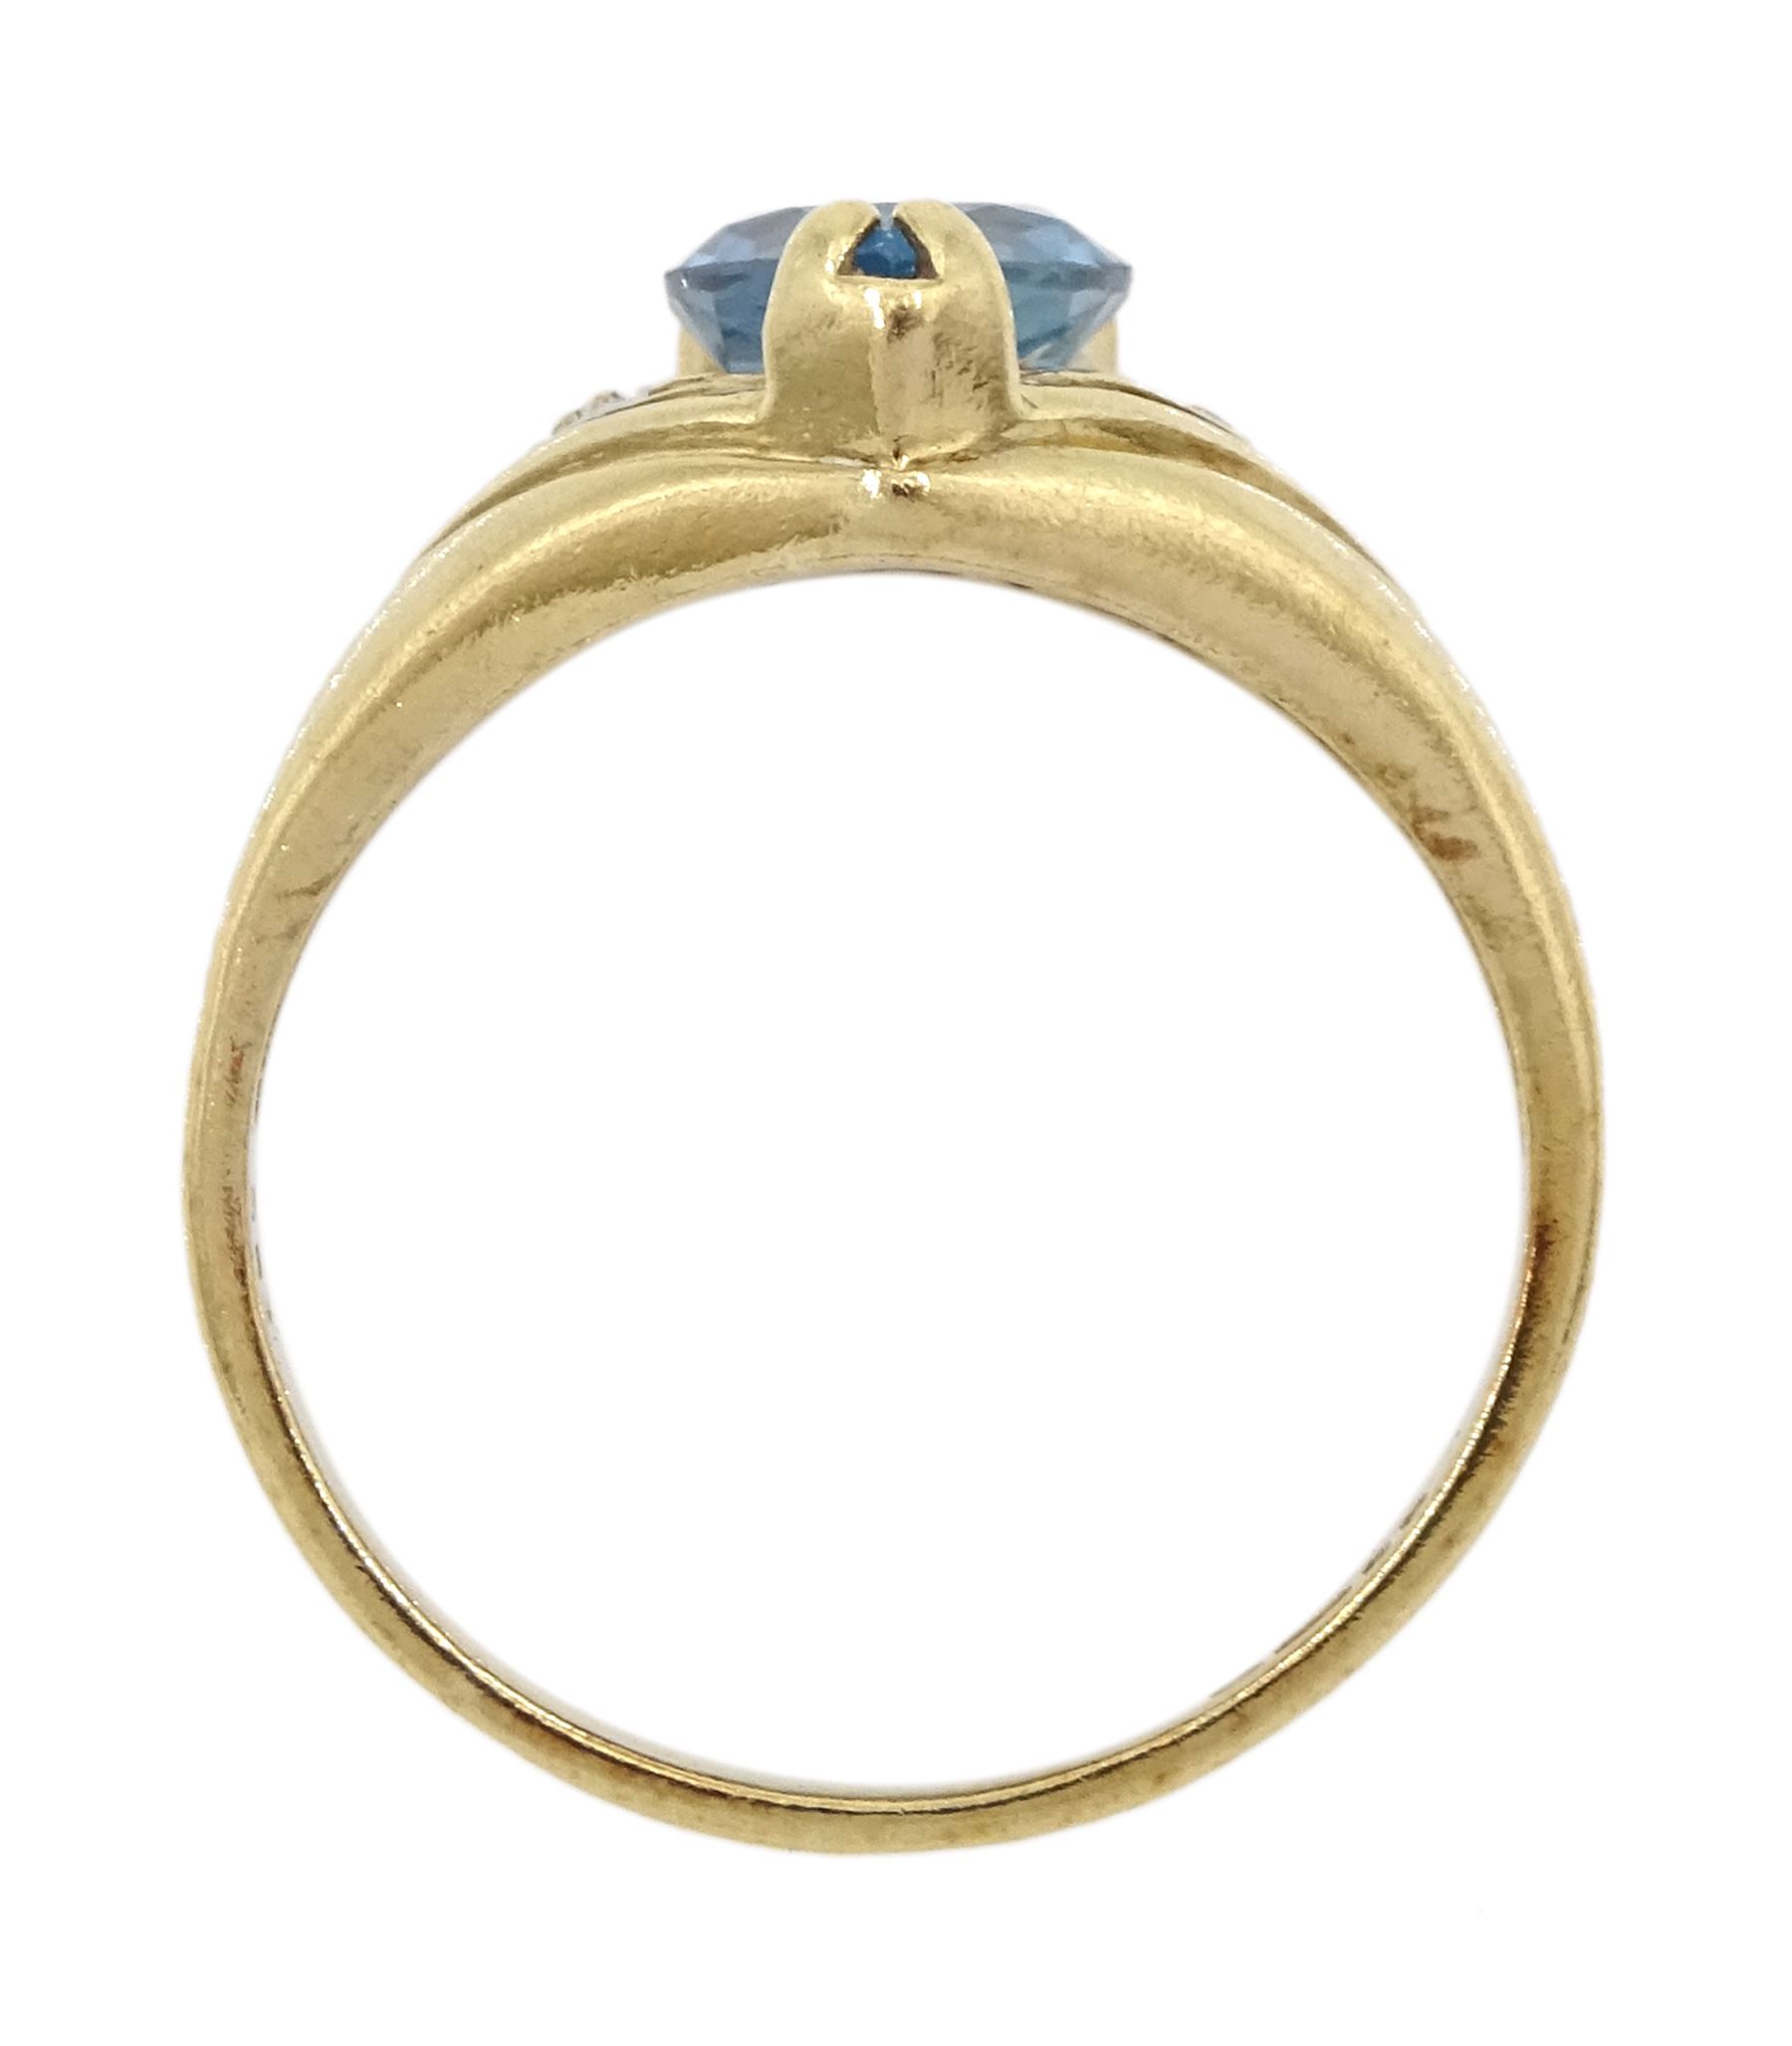 9ct gold pear cut London blue topaz ring - Image 4 of 4